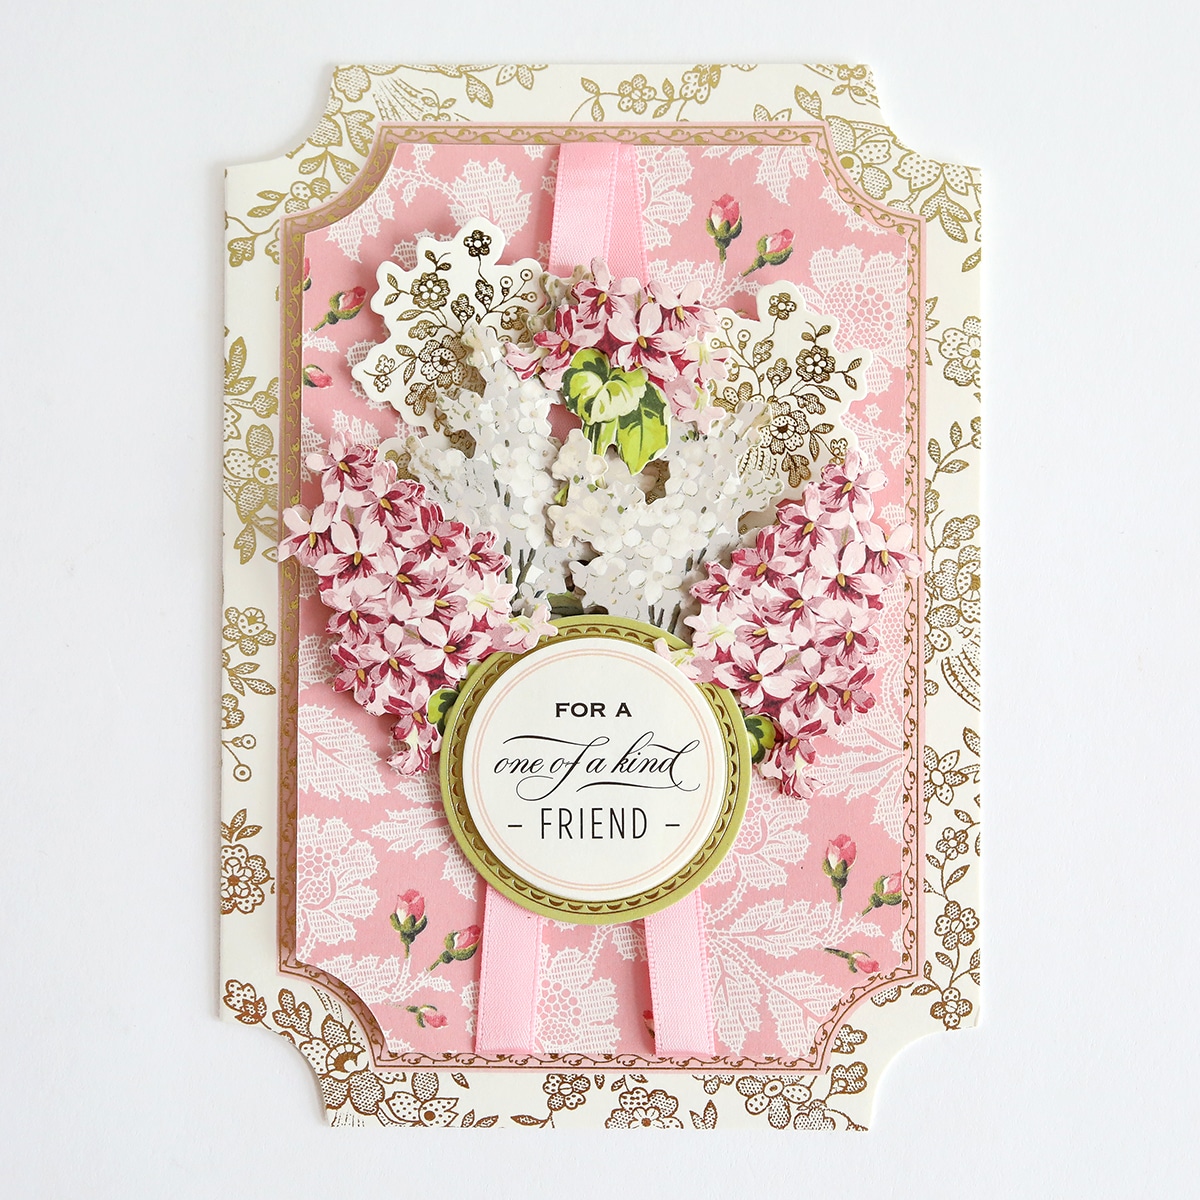 A pink and gold card with flowers on it.